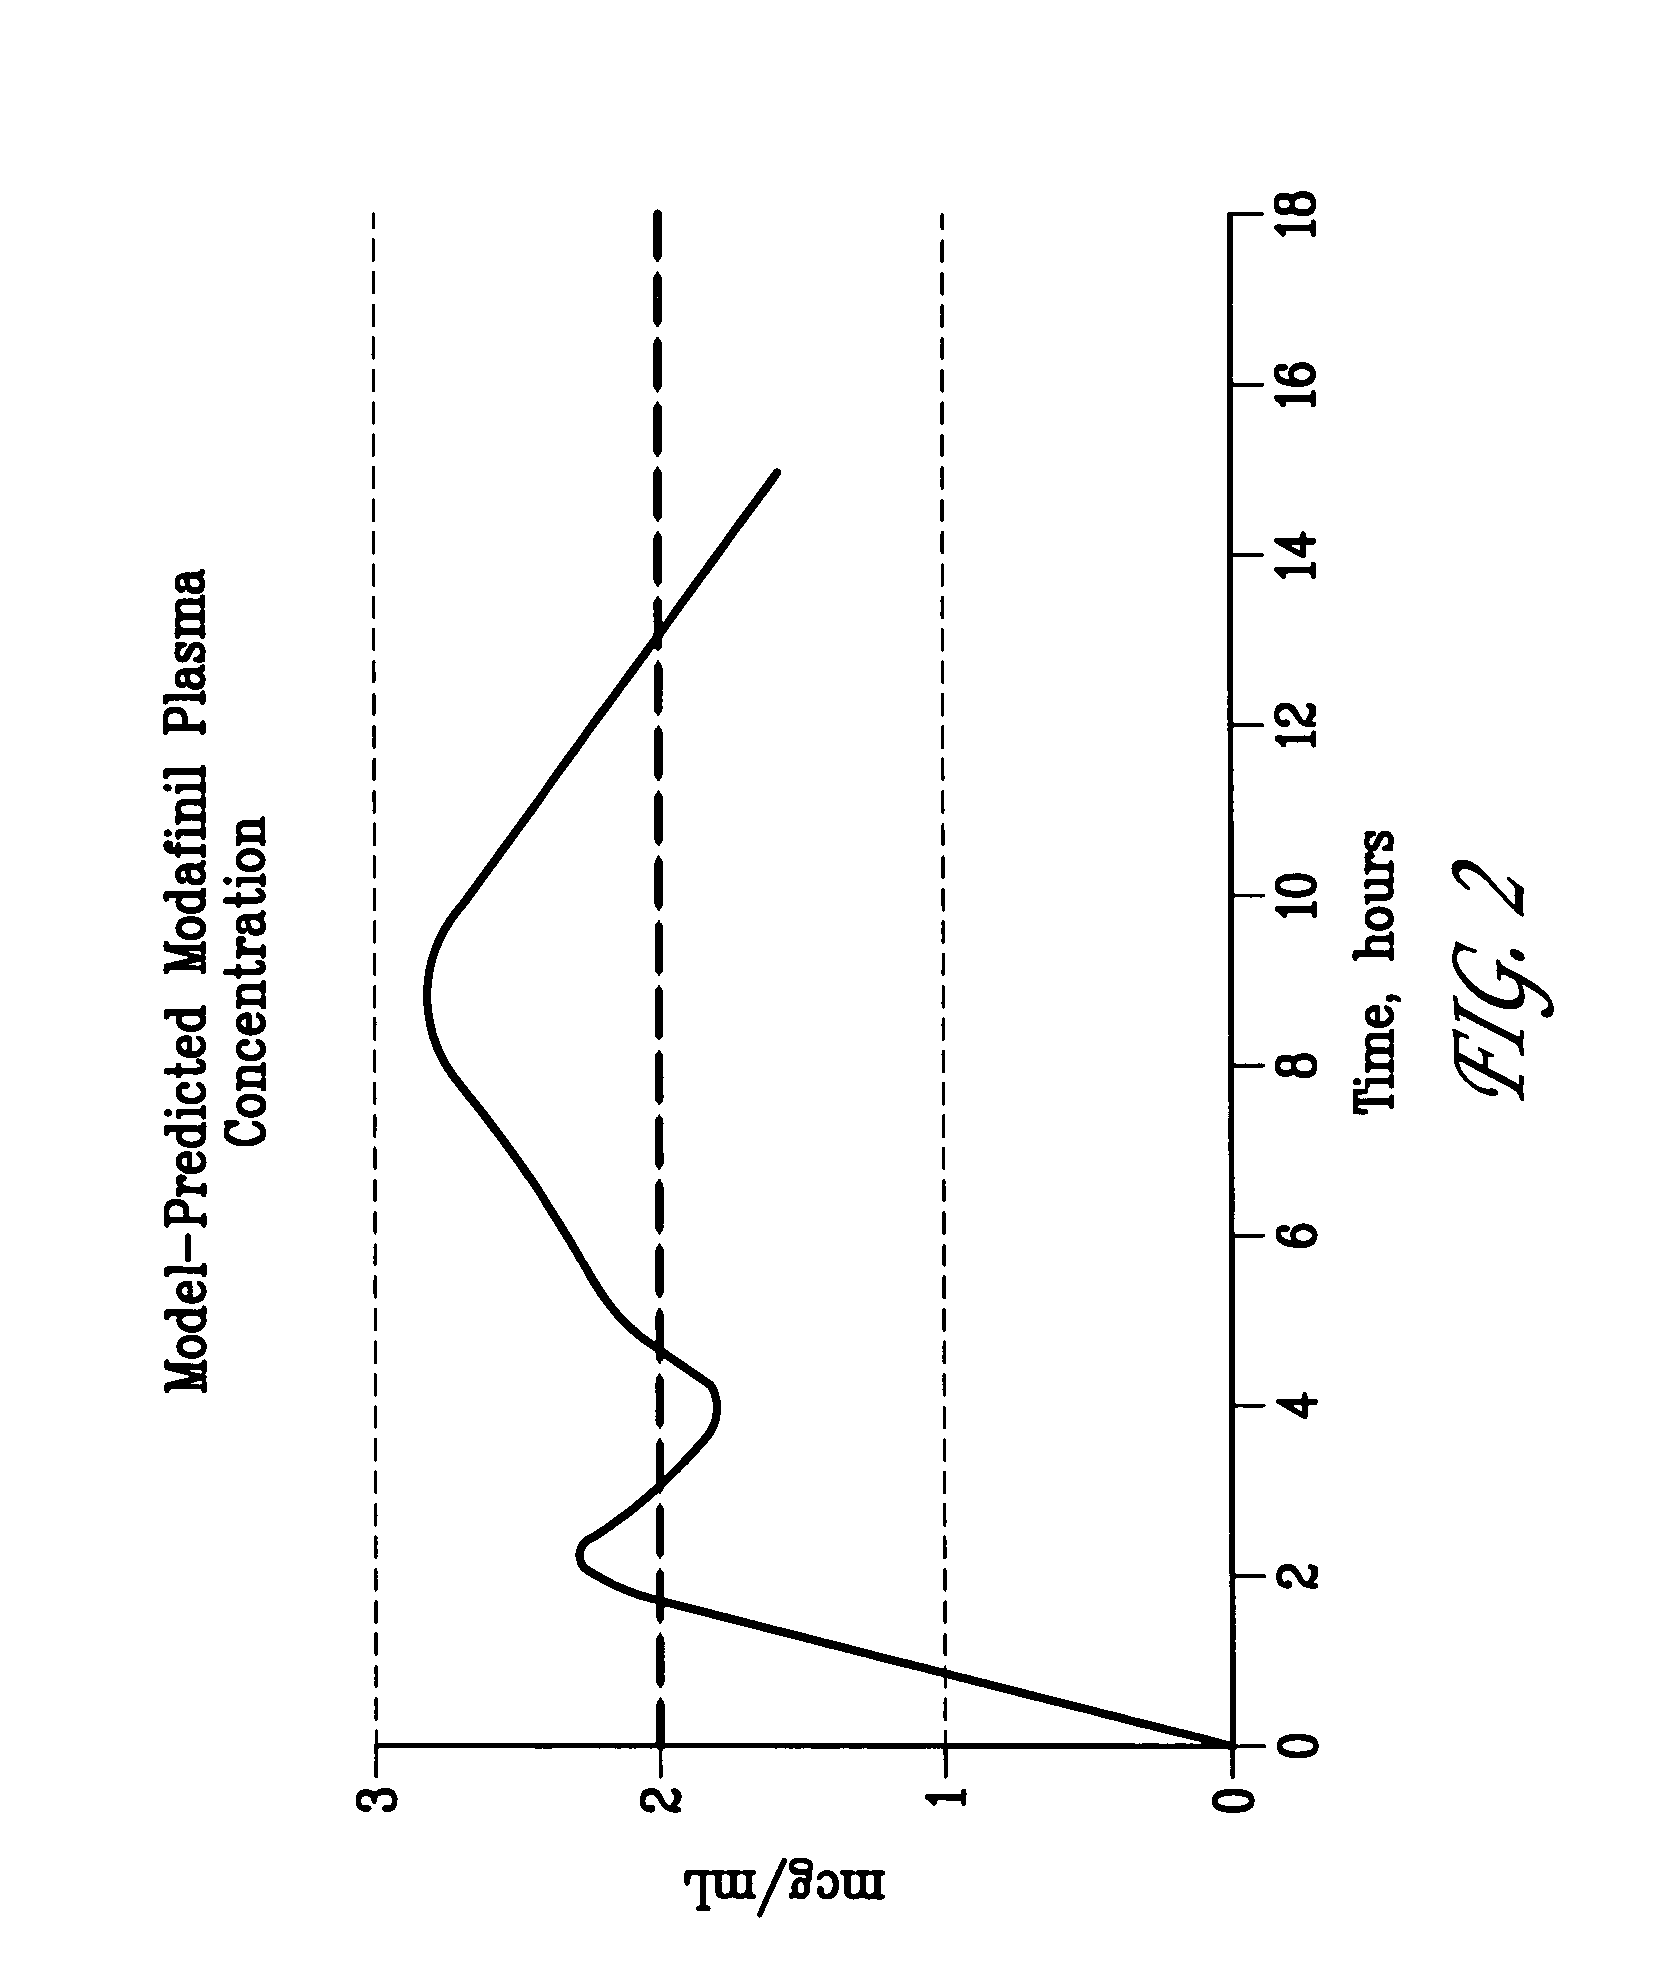 Modafinil modified release pharmaceutical compositions